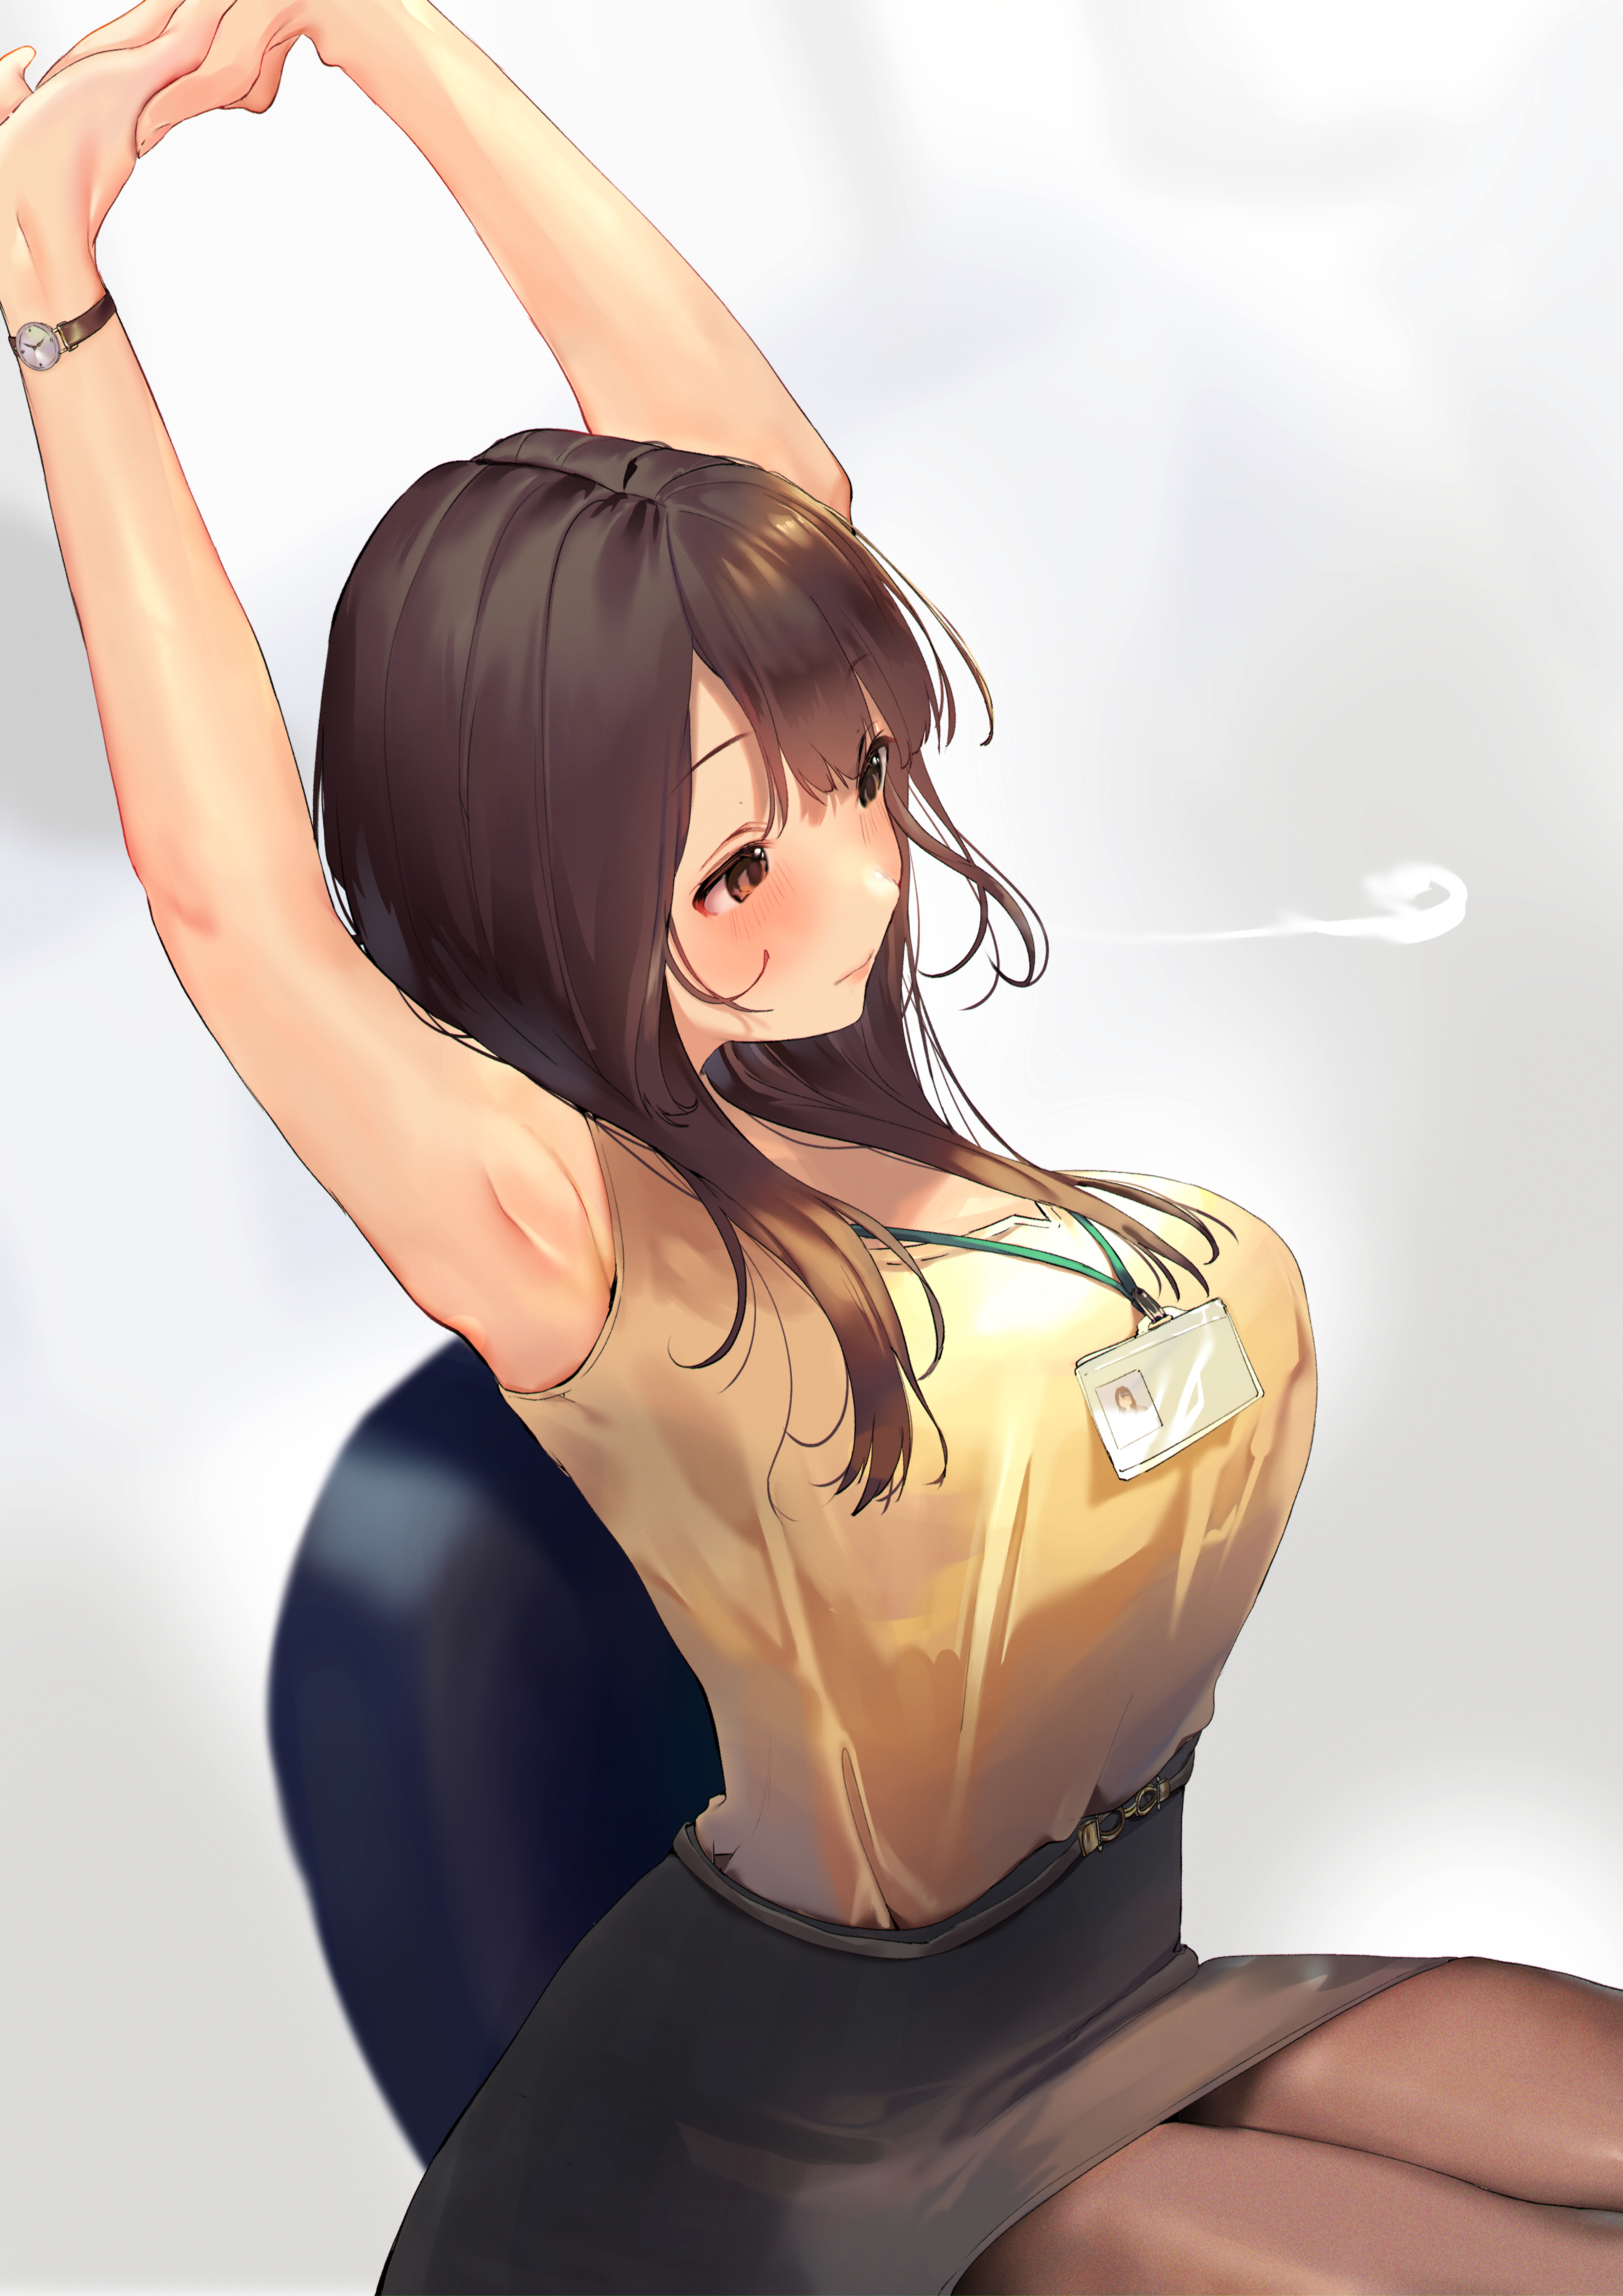 Anime Anime Girls Original Characters Office Girl Arms Up Stretching Watch Brunette Profile Blushing 2894x4093